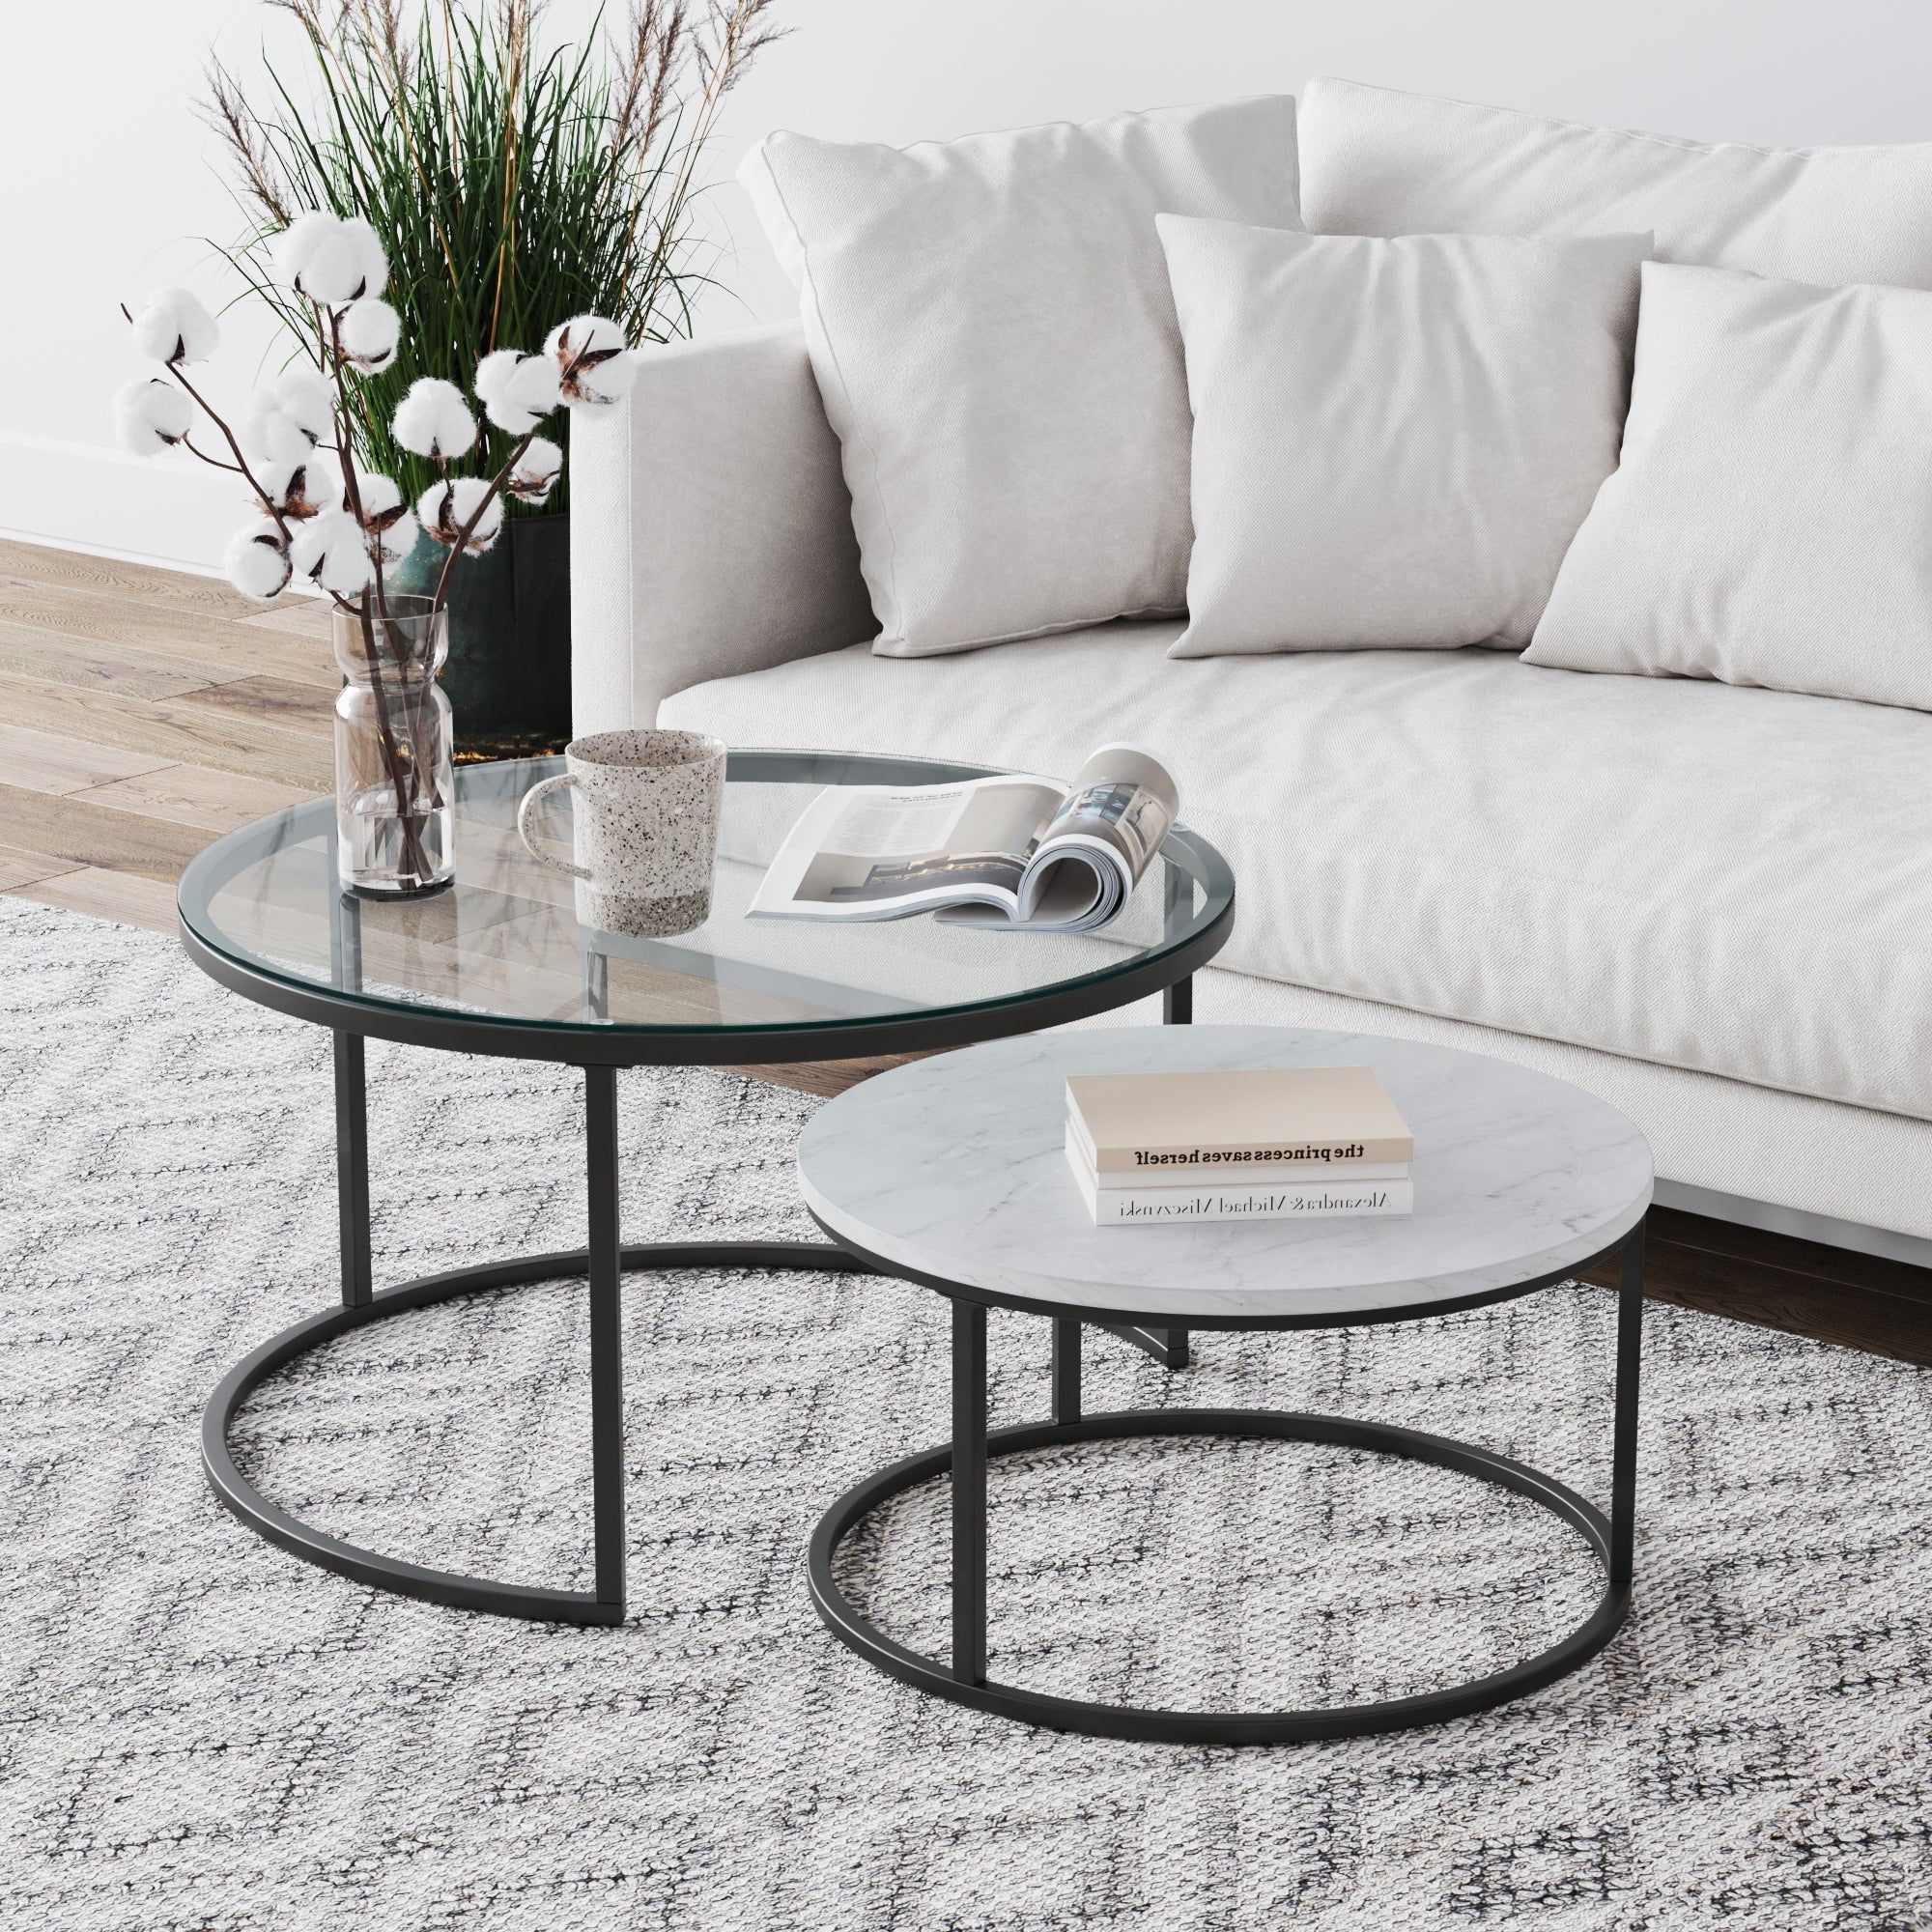 Newest Nathan James Stella Round Nesting Coffee Table Set Of 2 Glass, Marble  Finish And Metal Frame, Marble/glass/black – Walmart With Nesting Coffee Tables (Photo 10 of 10)